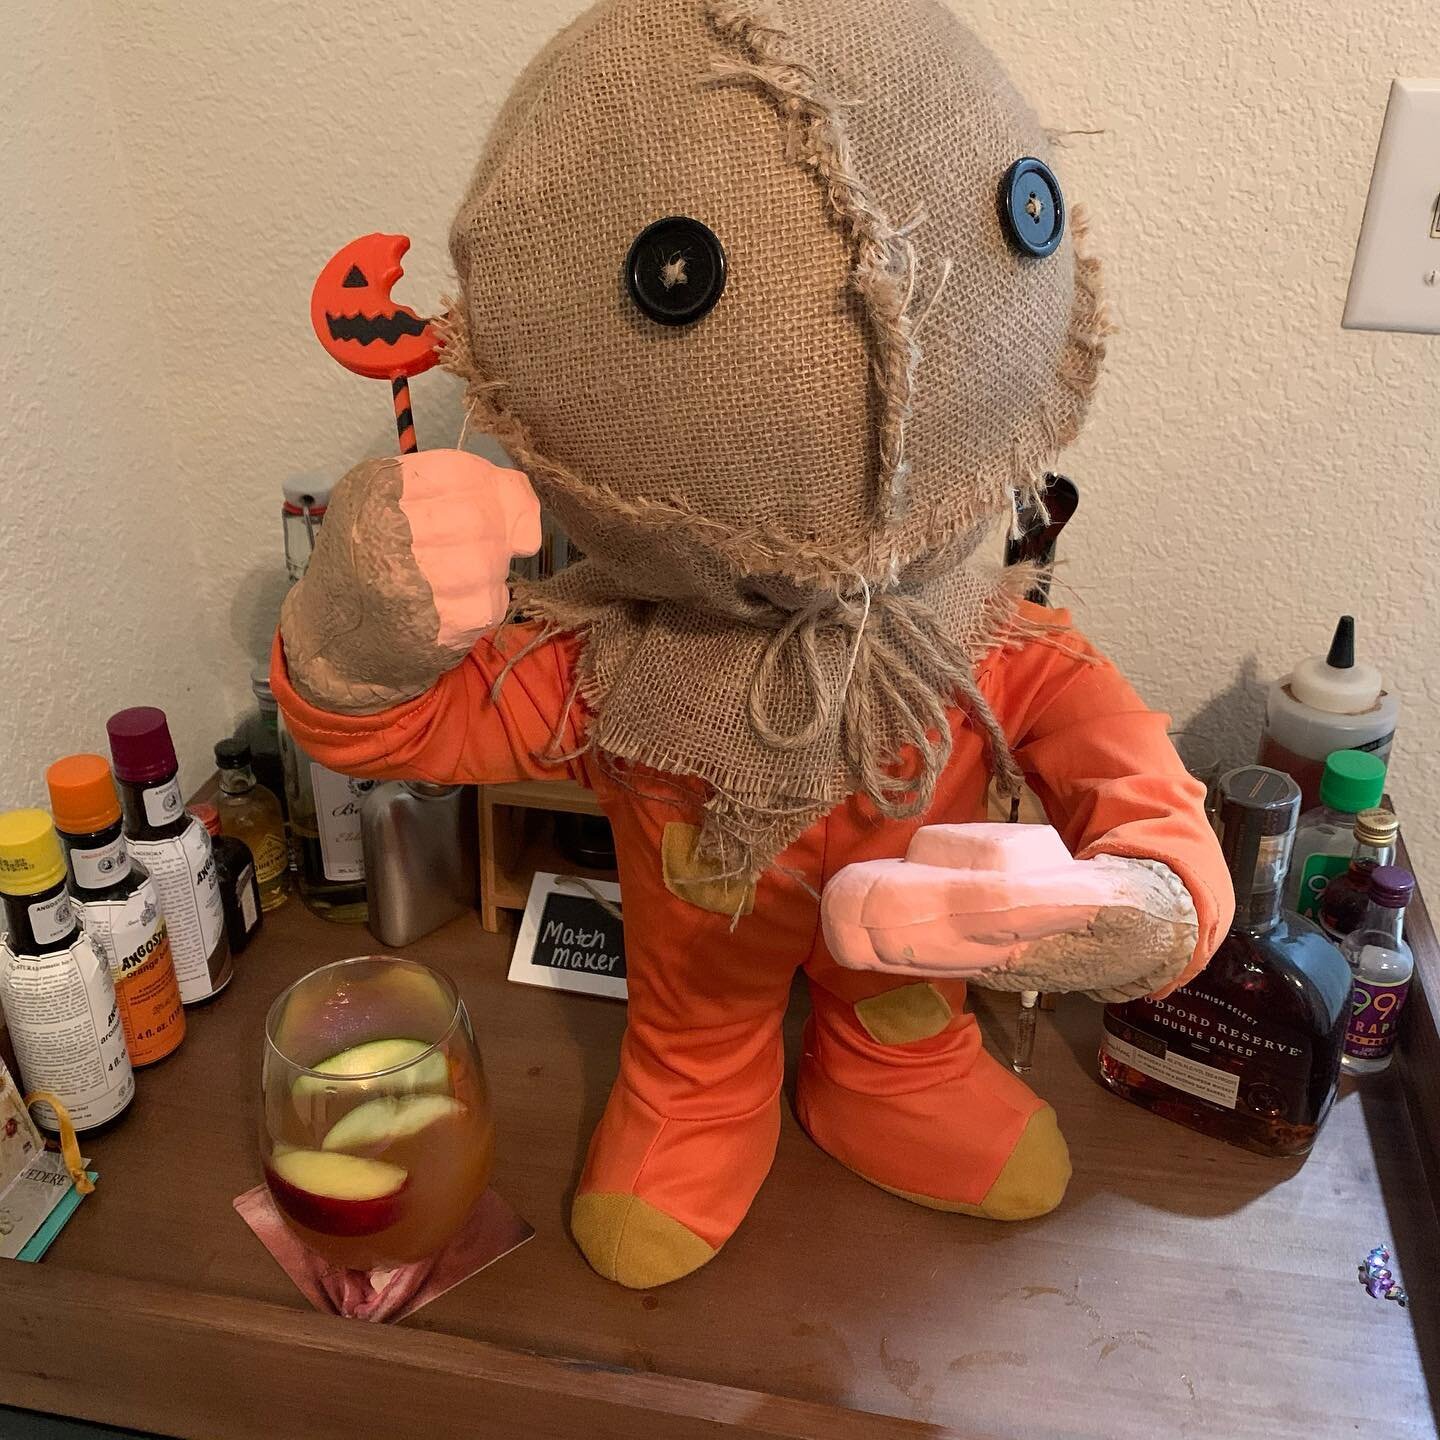 Trick &lsquo;r Treat and a Samhain Cider

&bull;.5oz Amaretto
&bull;.5oz peanut butter whiskey
&bull;Top with apple cider 
&bull;Garnish with apple slices 
&bull;Smell my feet, give me something good to eat. If you don&rsquo;t, I don&rsquo;t care, I&